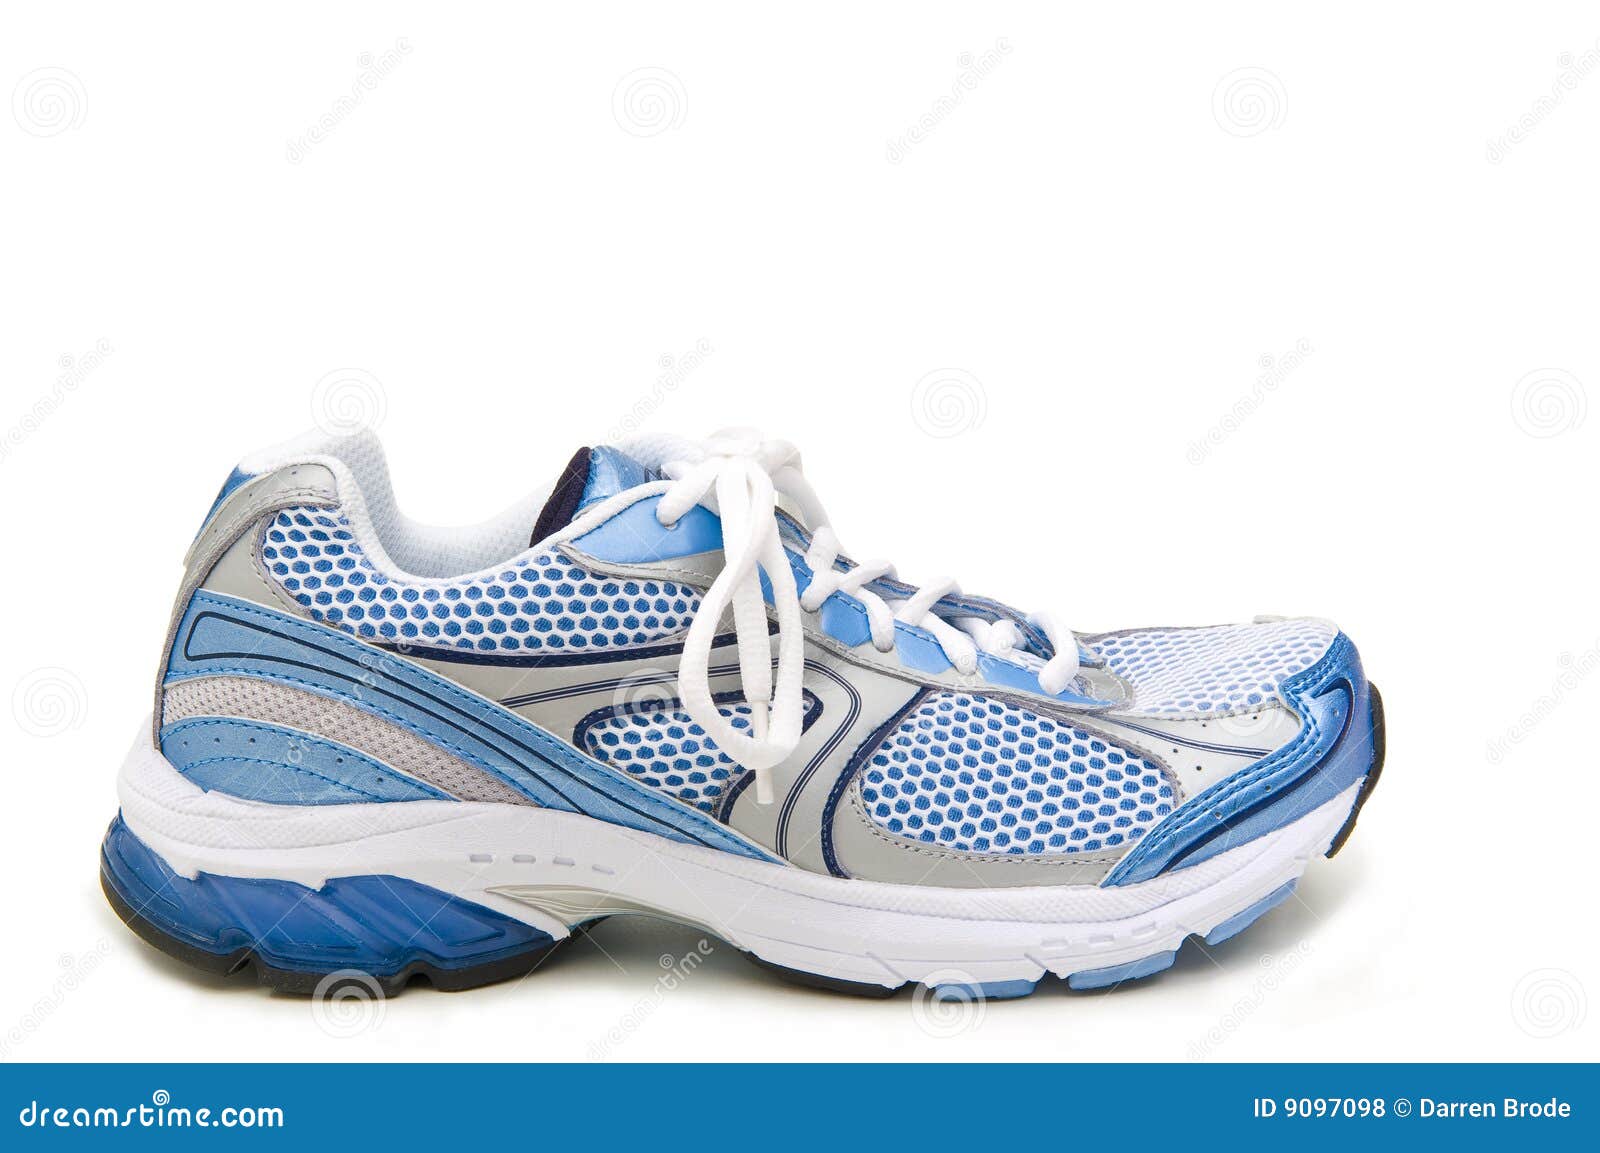 Running shoe profile stock photo. Image of rubber, pair - 9097098